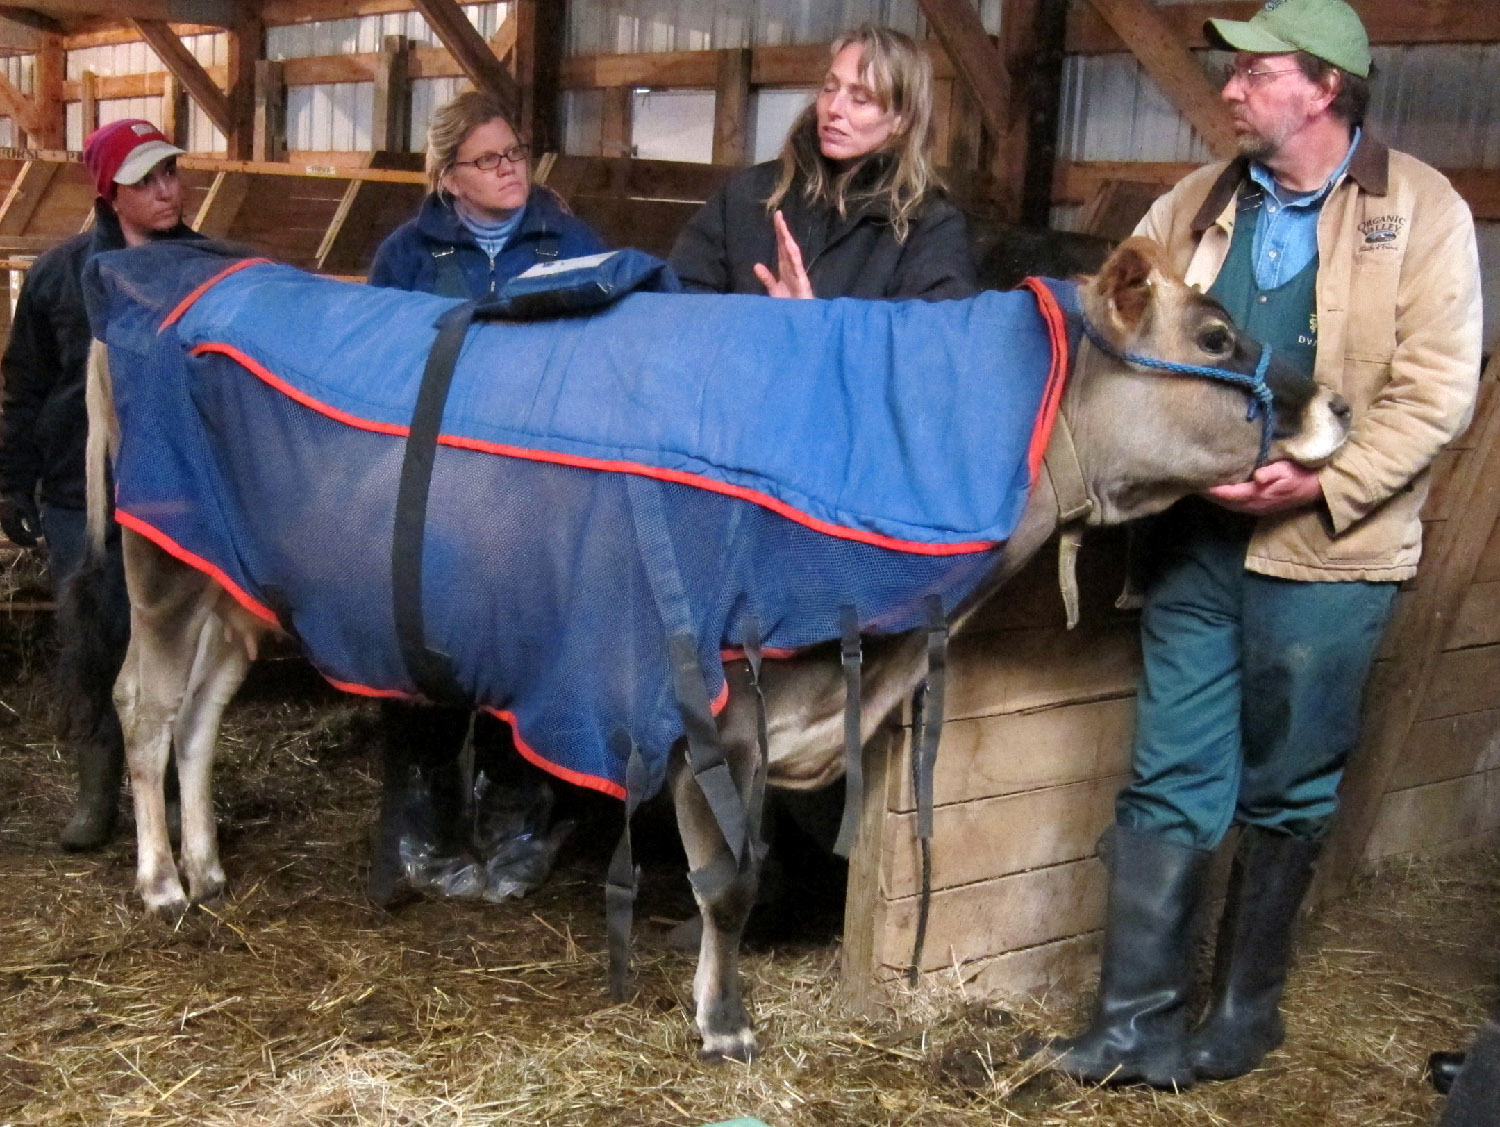 A Jersey cow wears a magnetic therapy blanket while farmers talk in a barn.